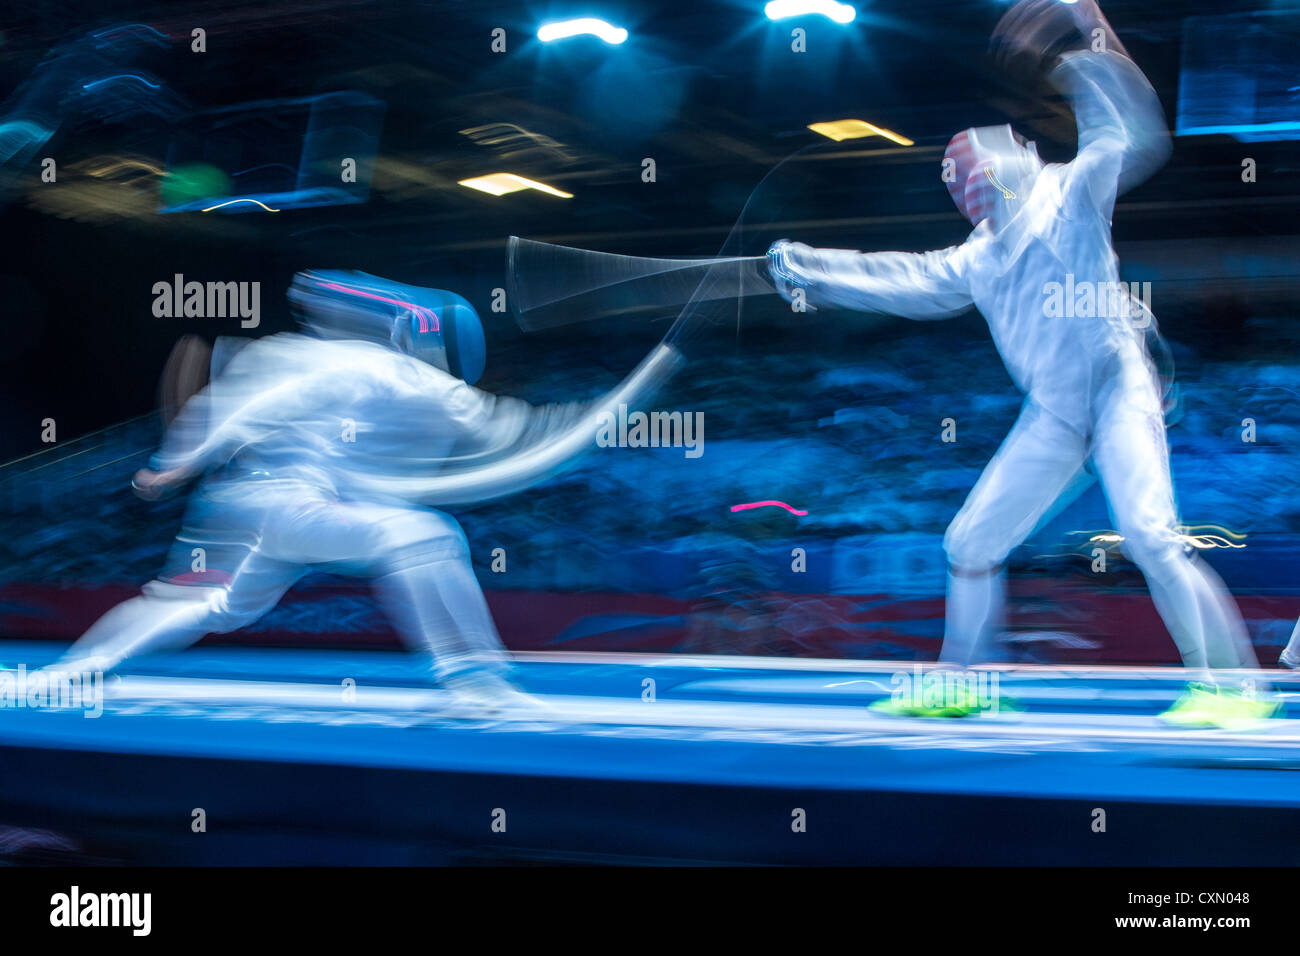 Blurred action of fencing competition. Stock Photo